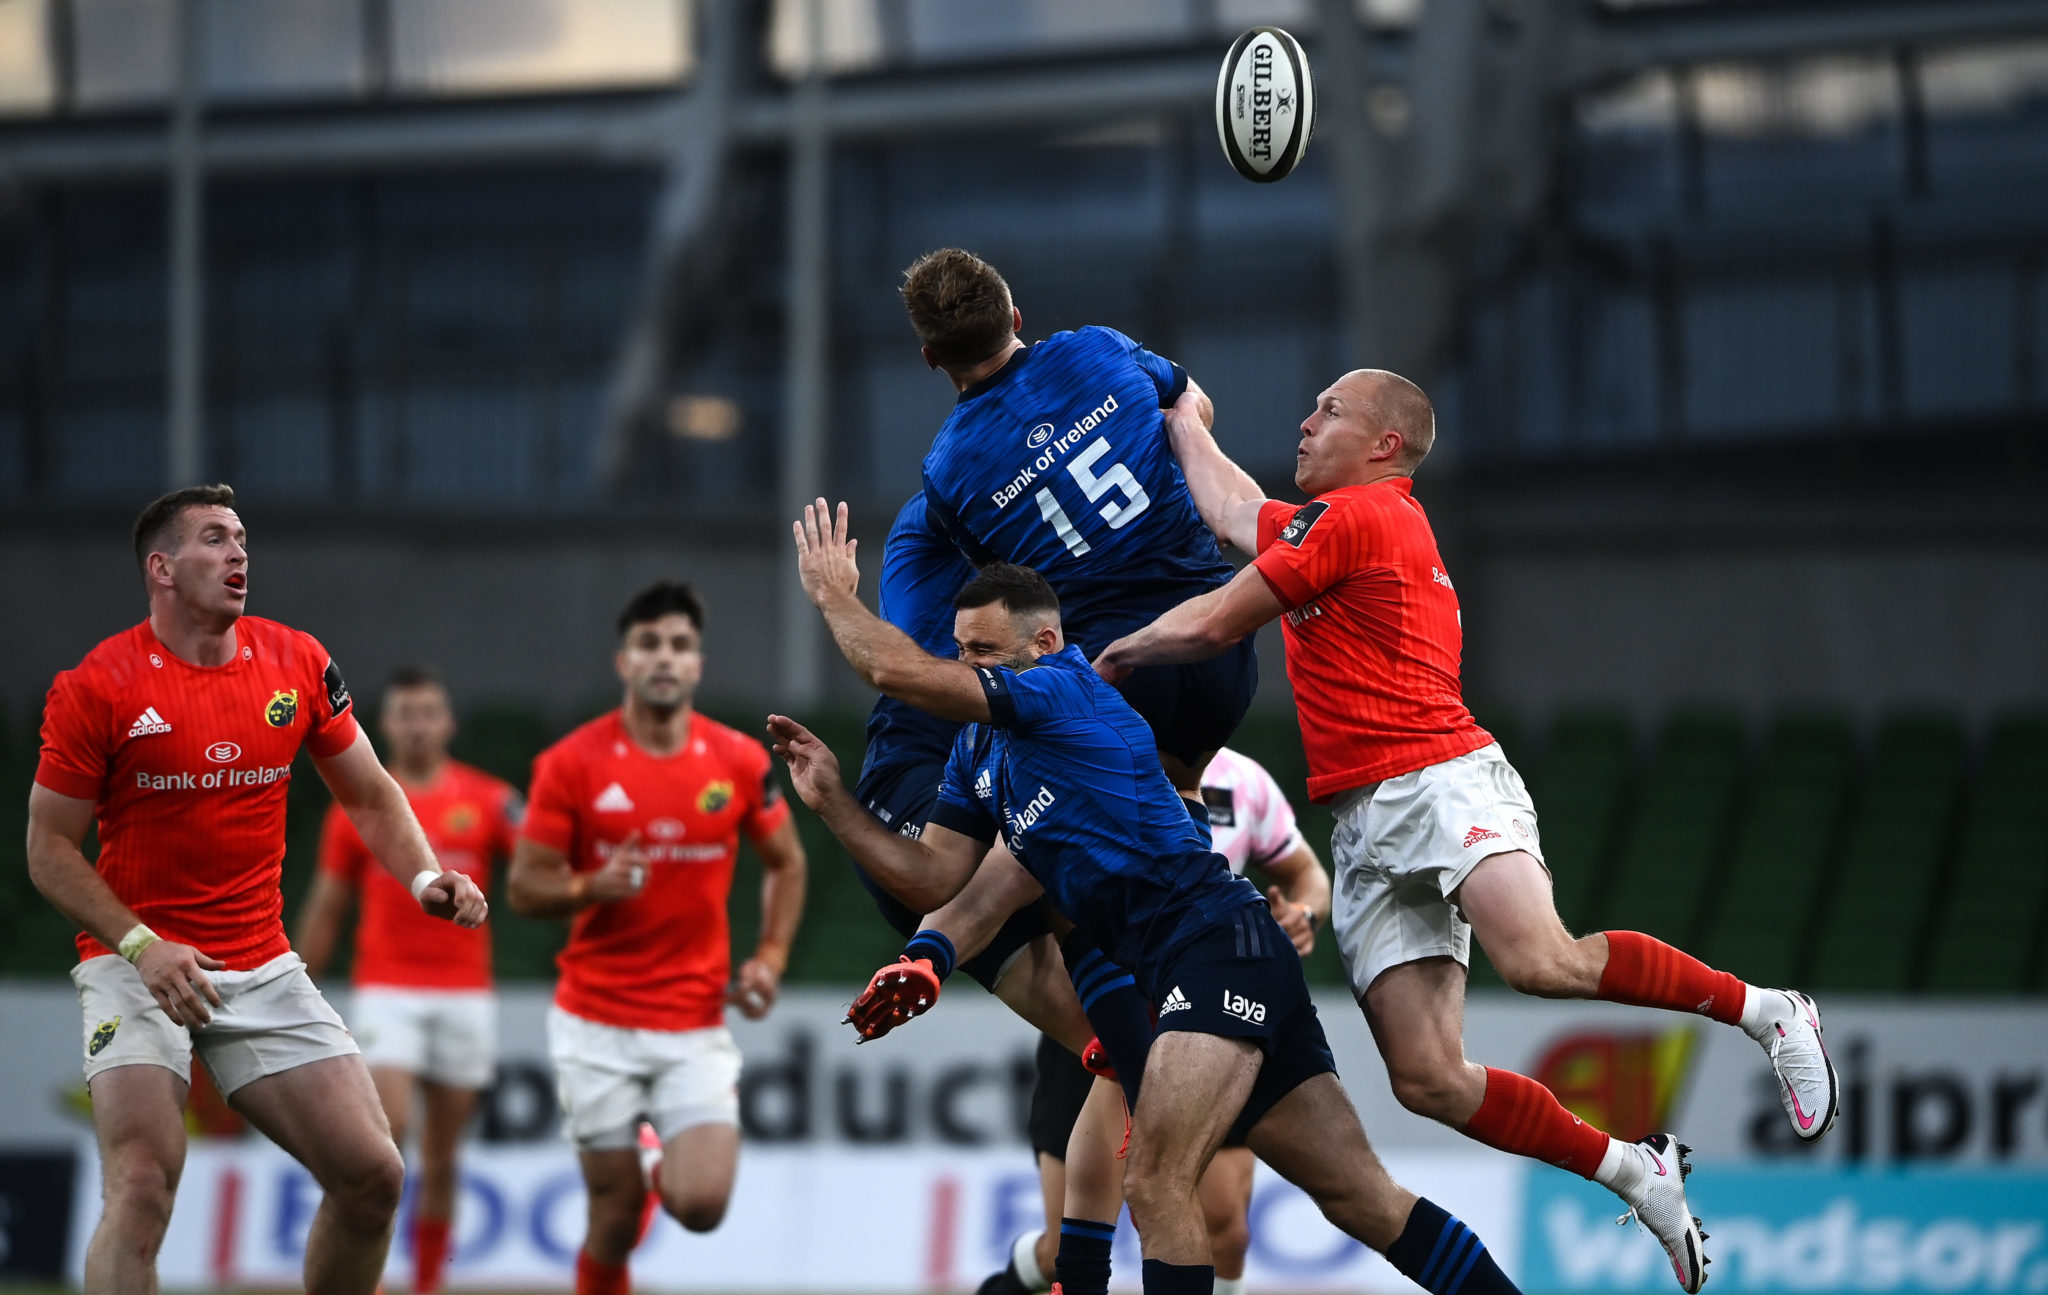 Jordan Larmour of Leinster and Keith Earls of Munster contest a high ball during the Guinness PRO14 Round 14 match between Leinster and Munster at the Aviva Stadium in Dubli